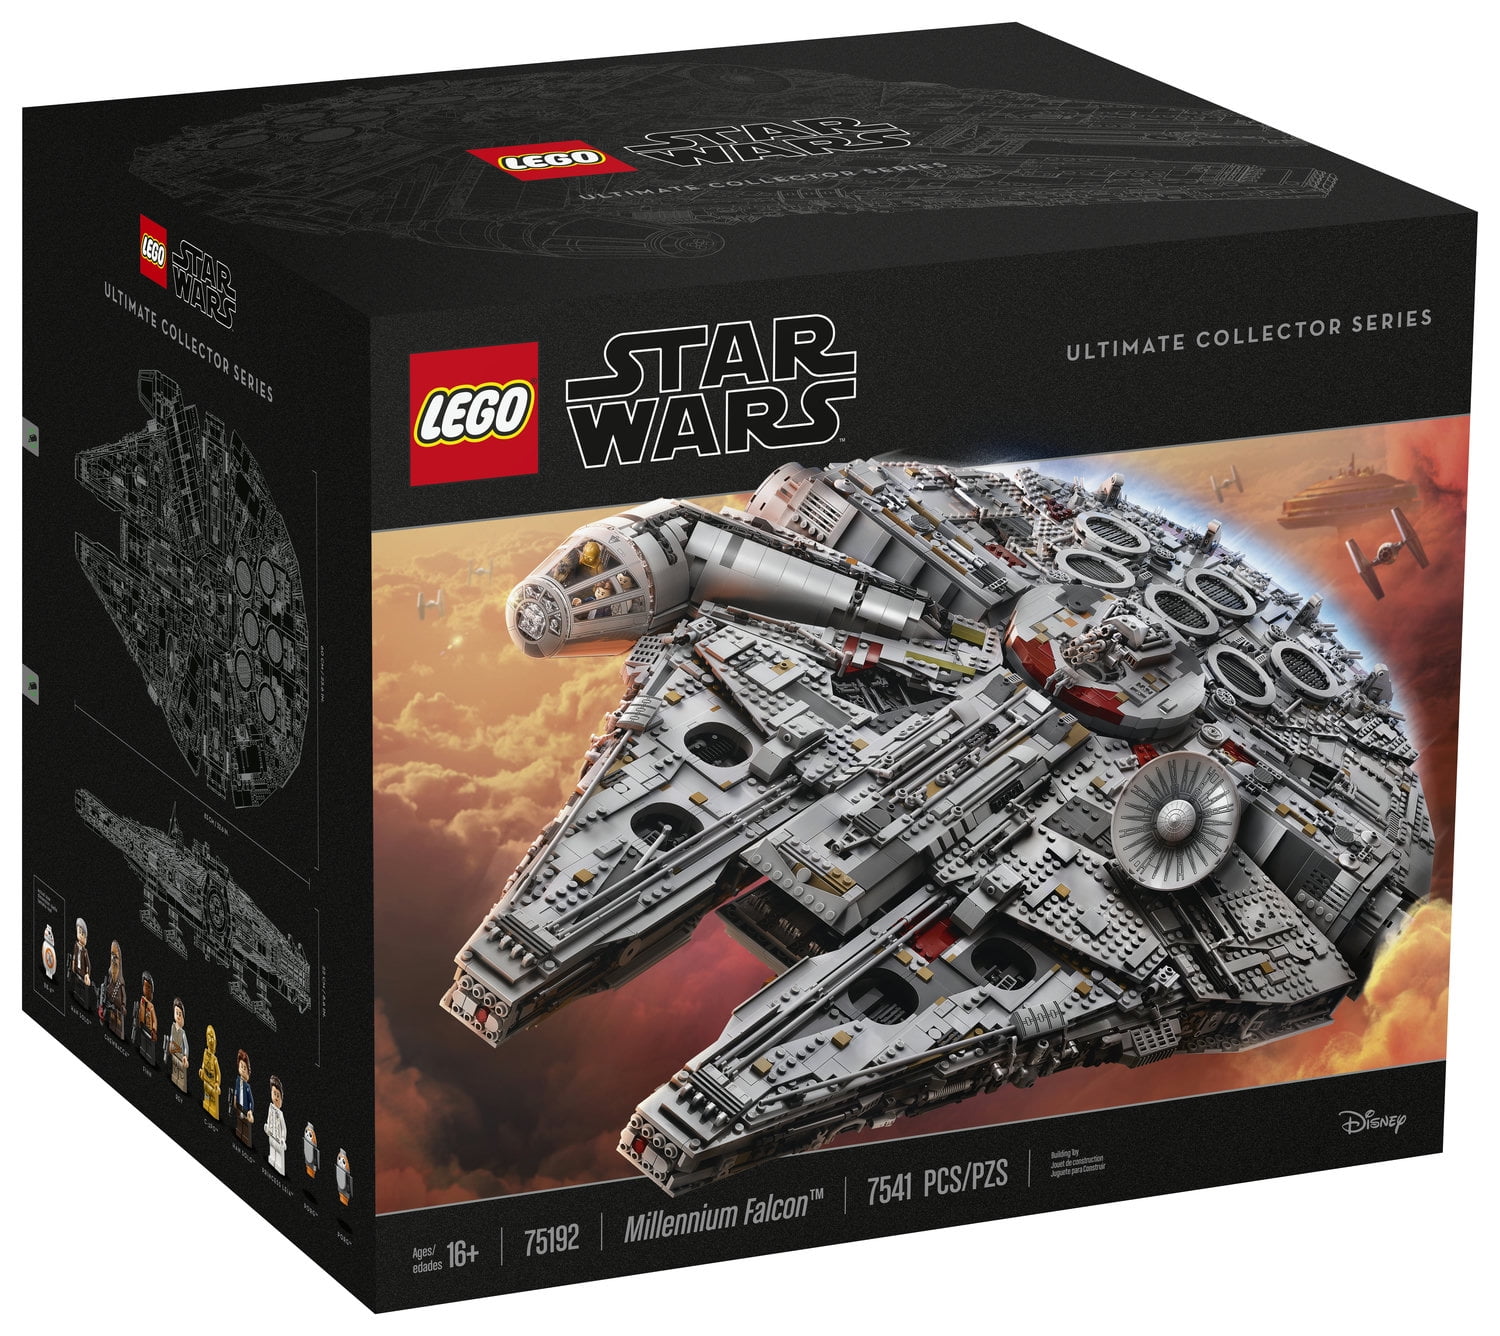 LEGO Star Wars Ultimate Millennium Falcon 75192 Expert Building Set and Starship Model Kit, Movie Collectible, Featuring Han Solo's Ship - Walmart.com